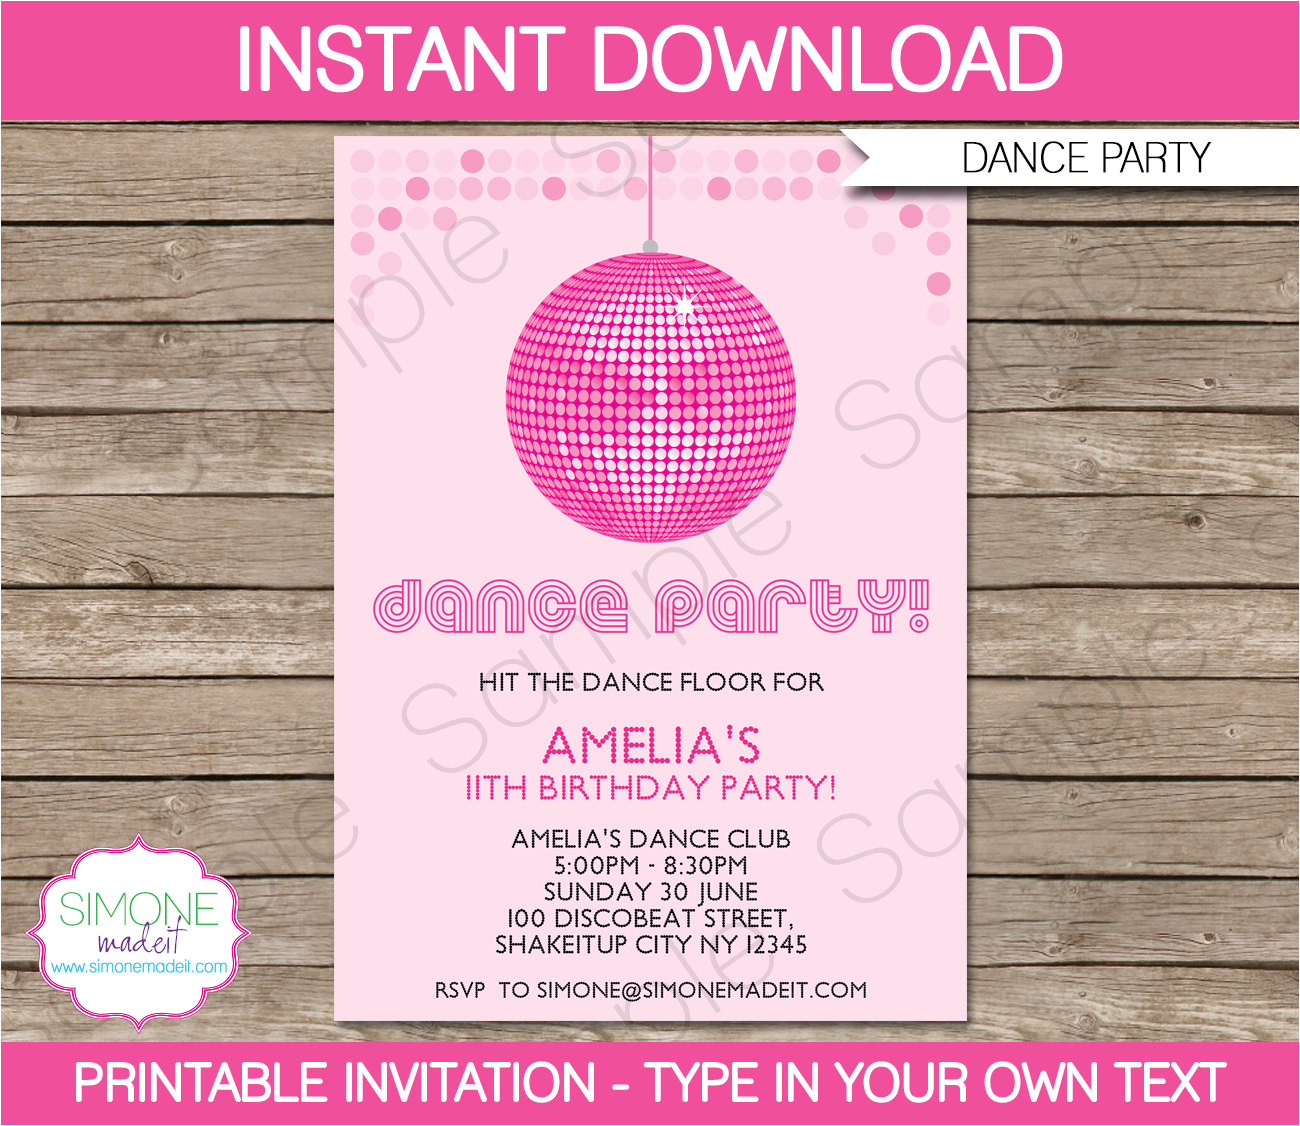 Dance Party Invitation Template Dance Party Invitation Template Birthday Party Instant